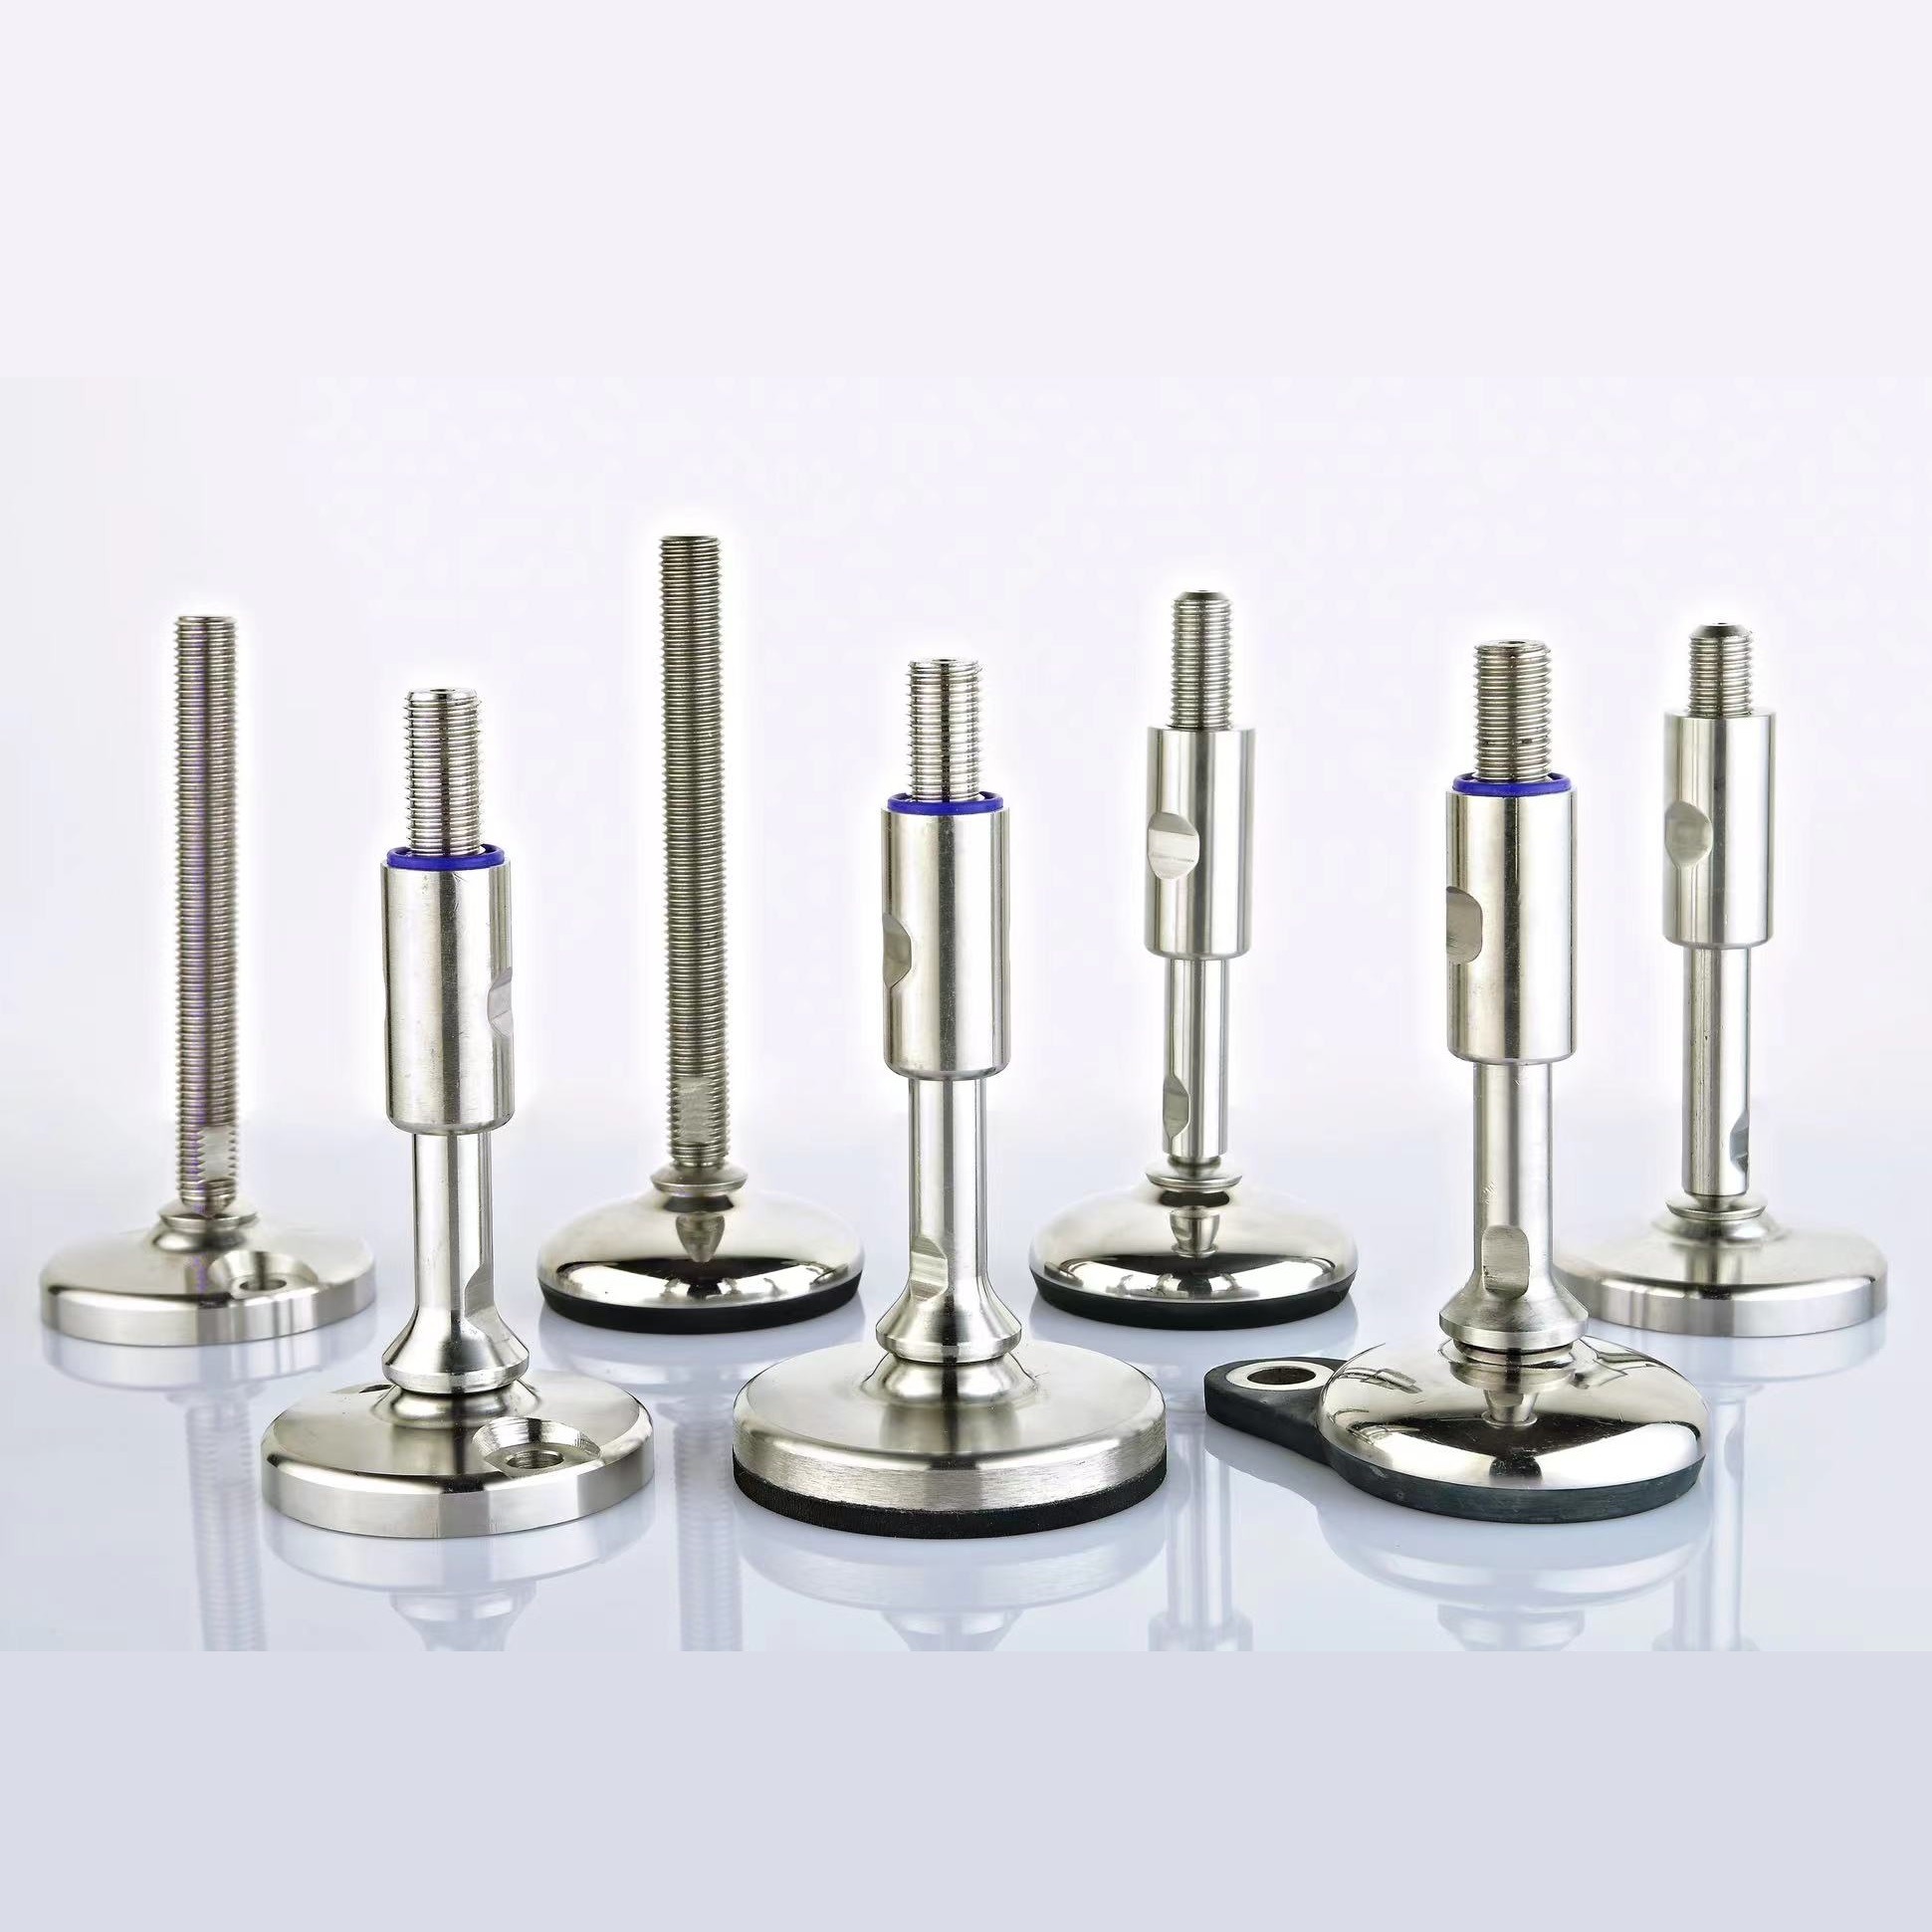 Stainless steel solid base machine leveling feet in hygienic design